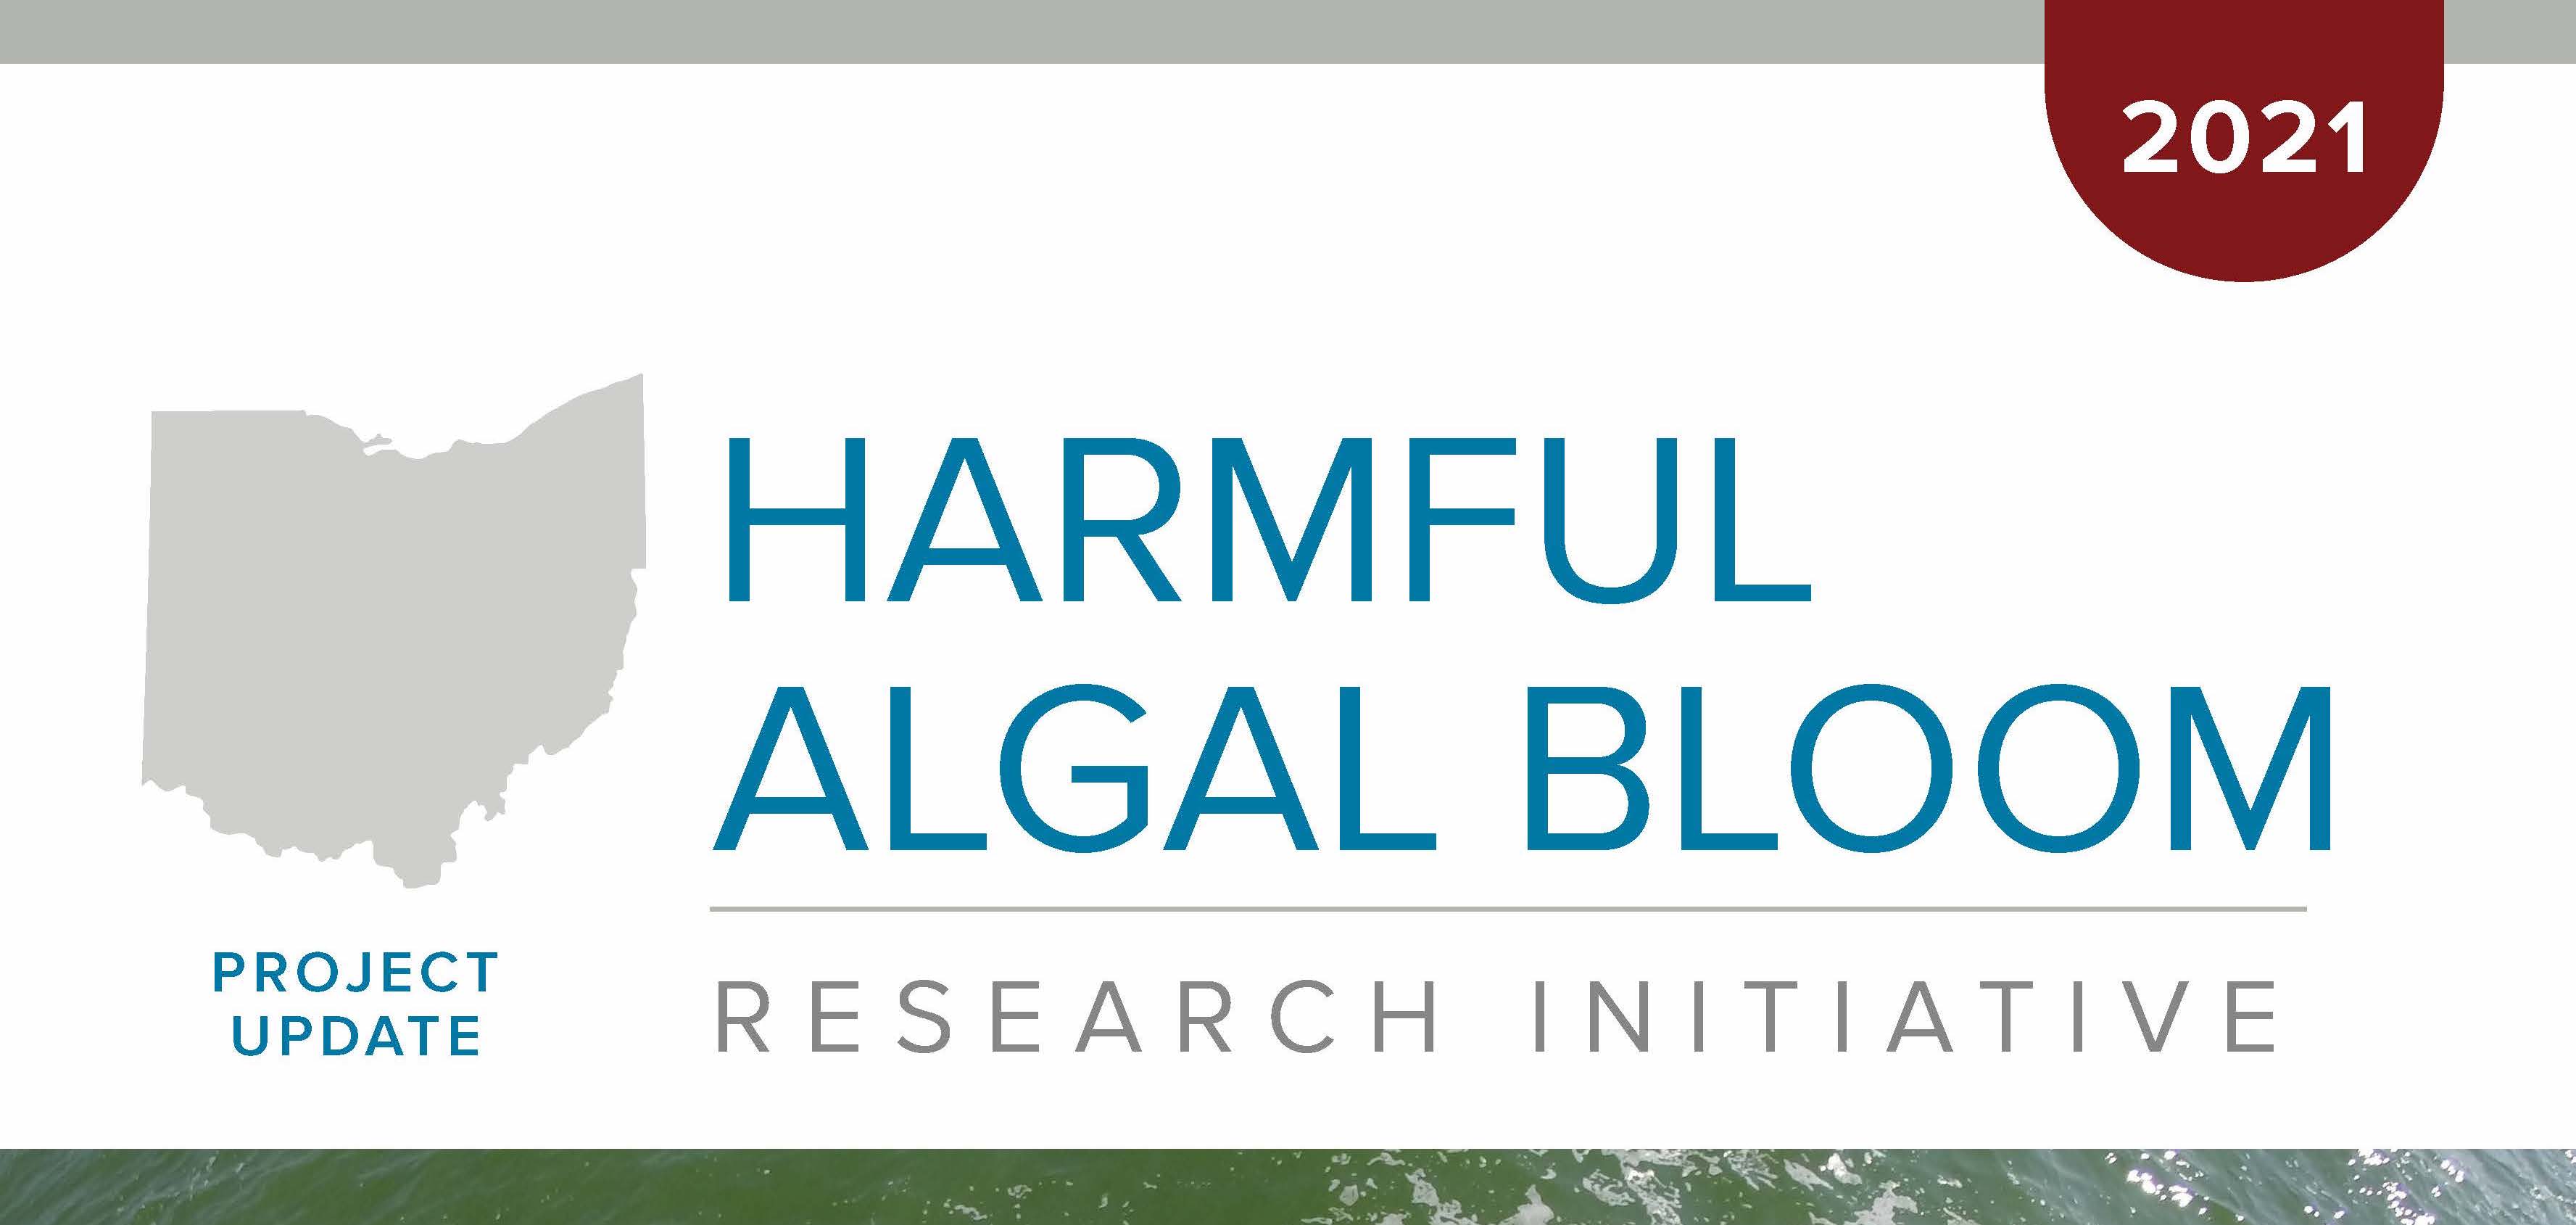 Ohio Sea Grant Harmful Algal Bloom Research Initiative Year 3 and 4 Project Update